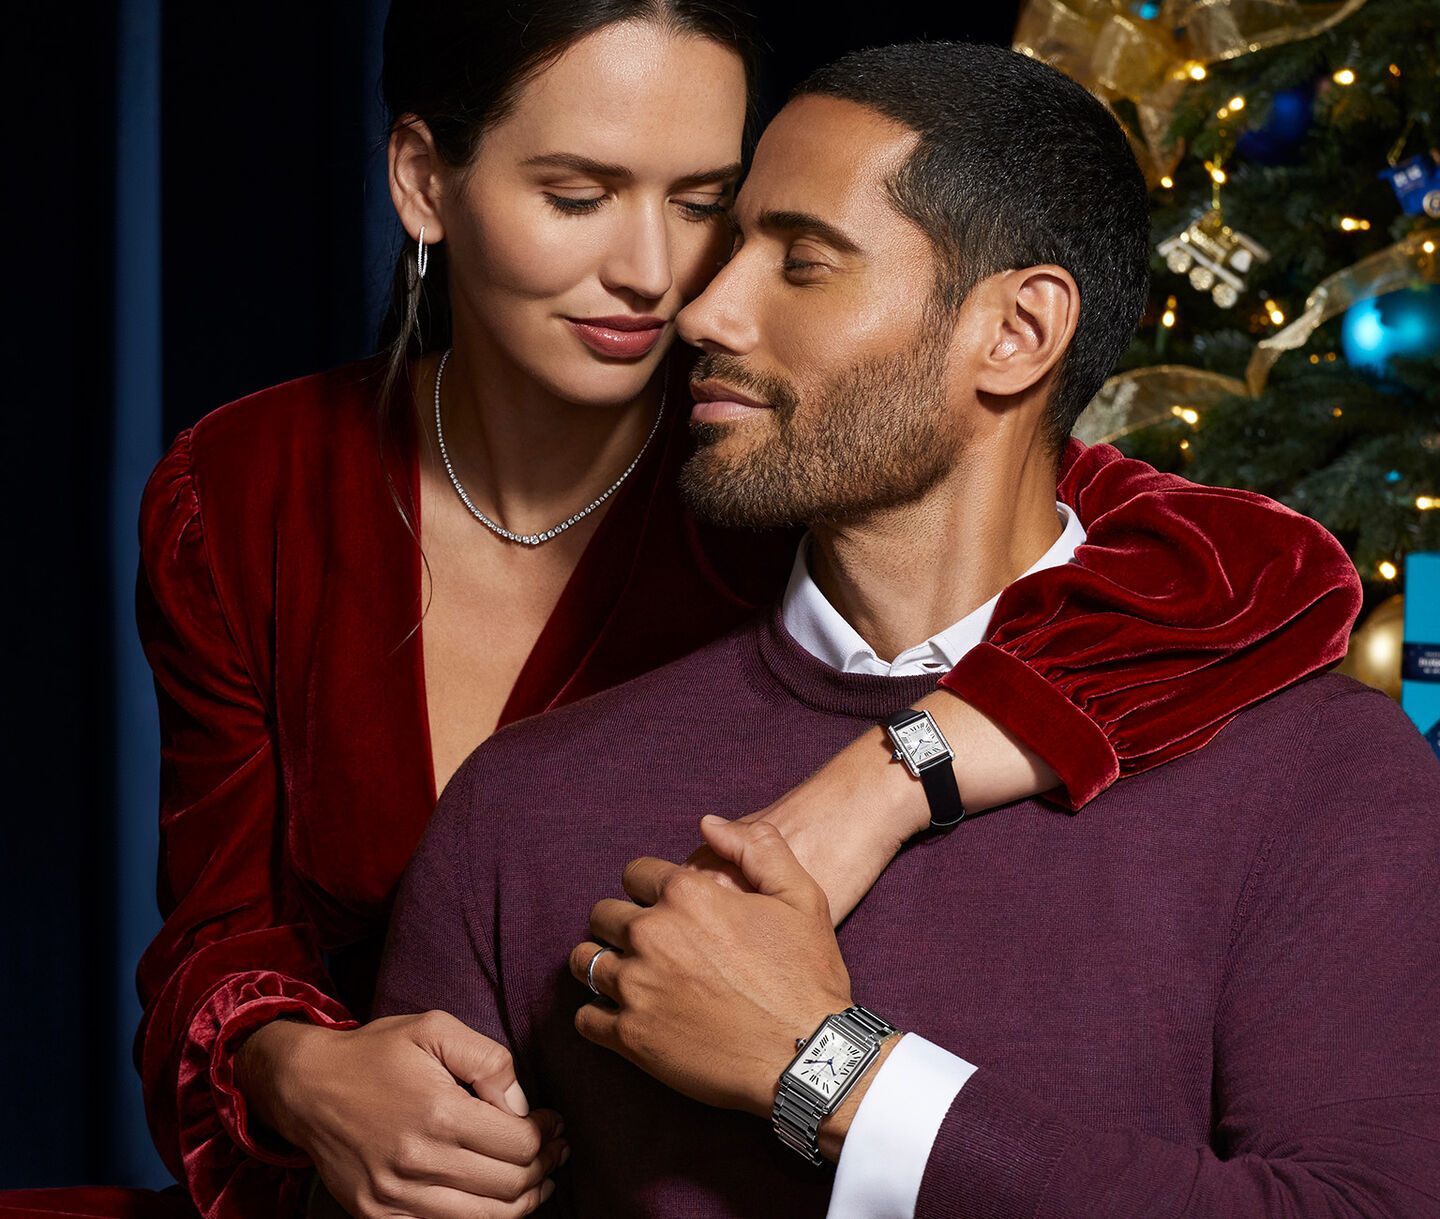 A man and woman embrace while wearing matching watches.